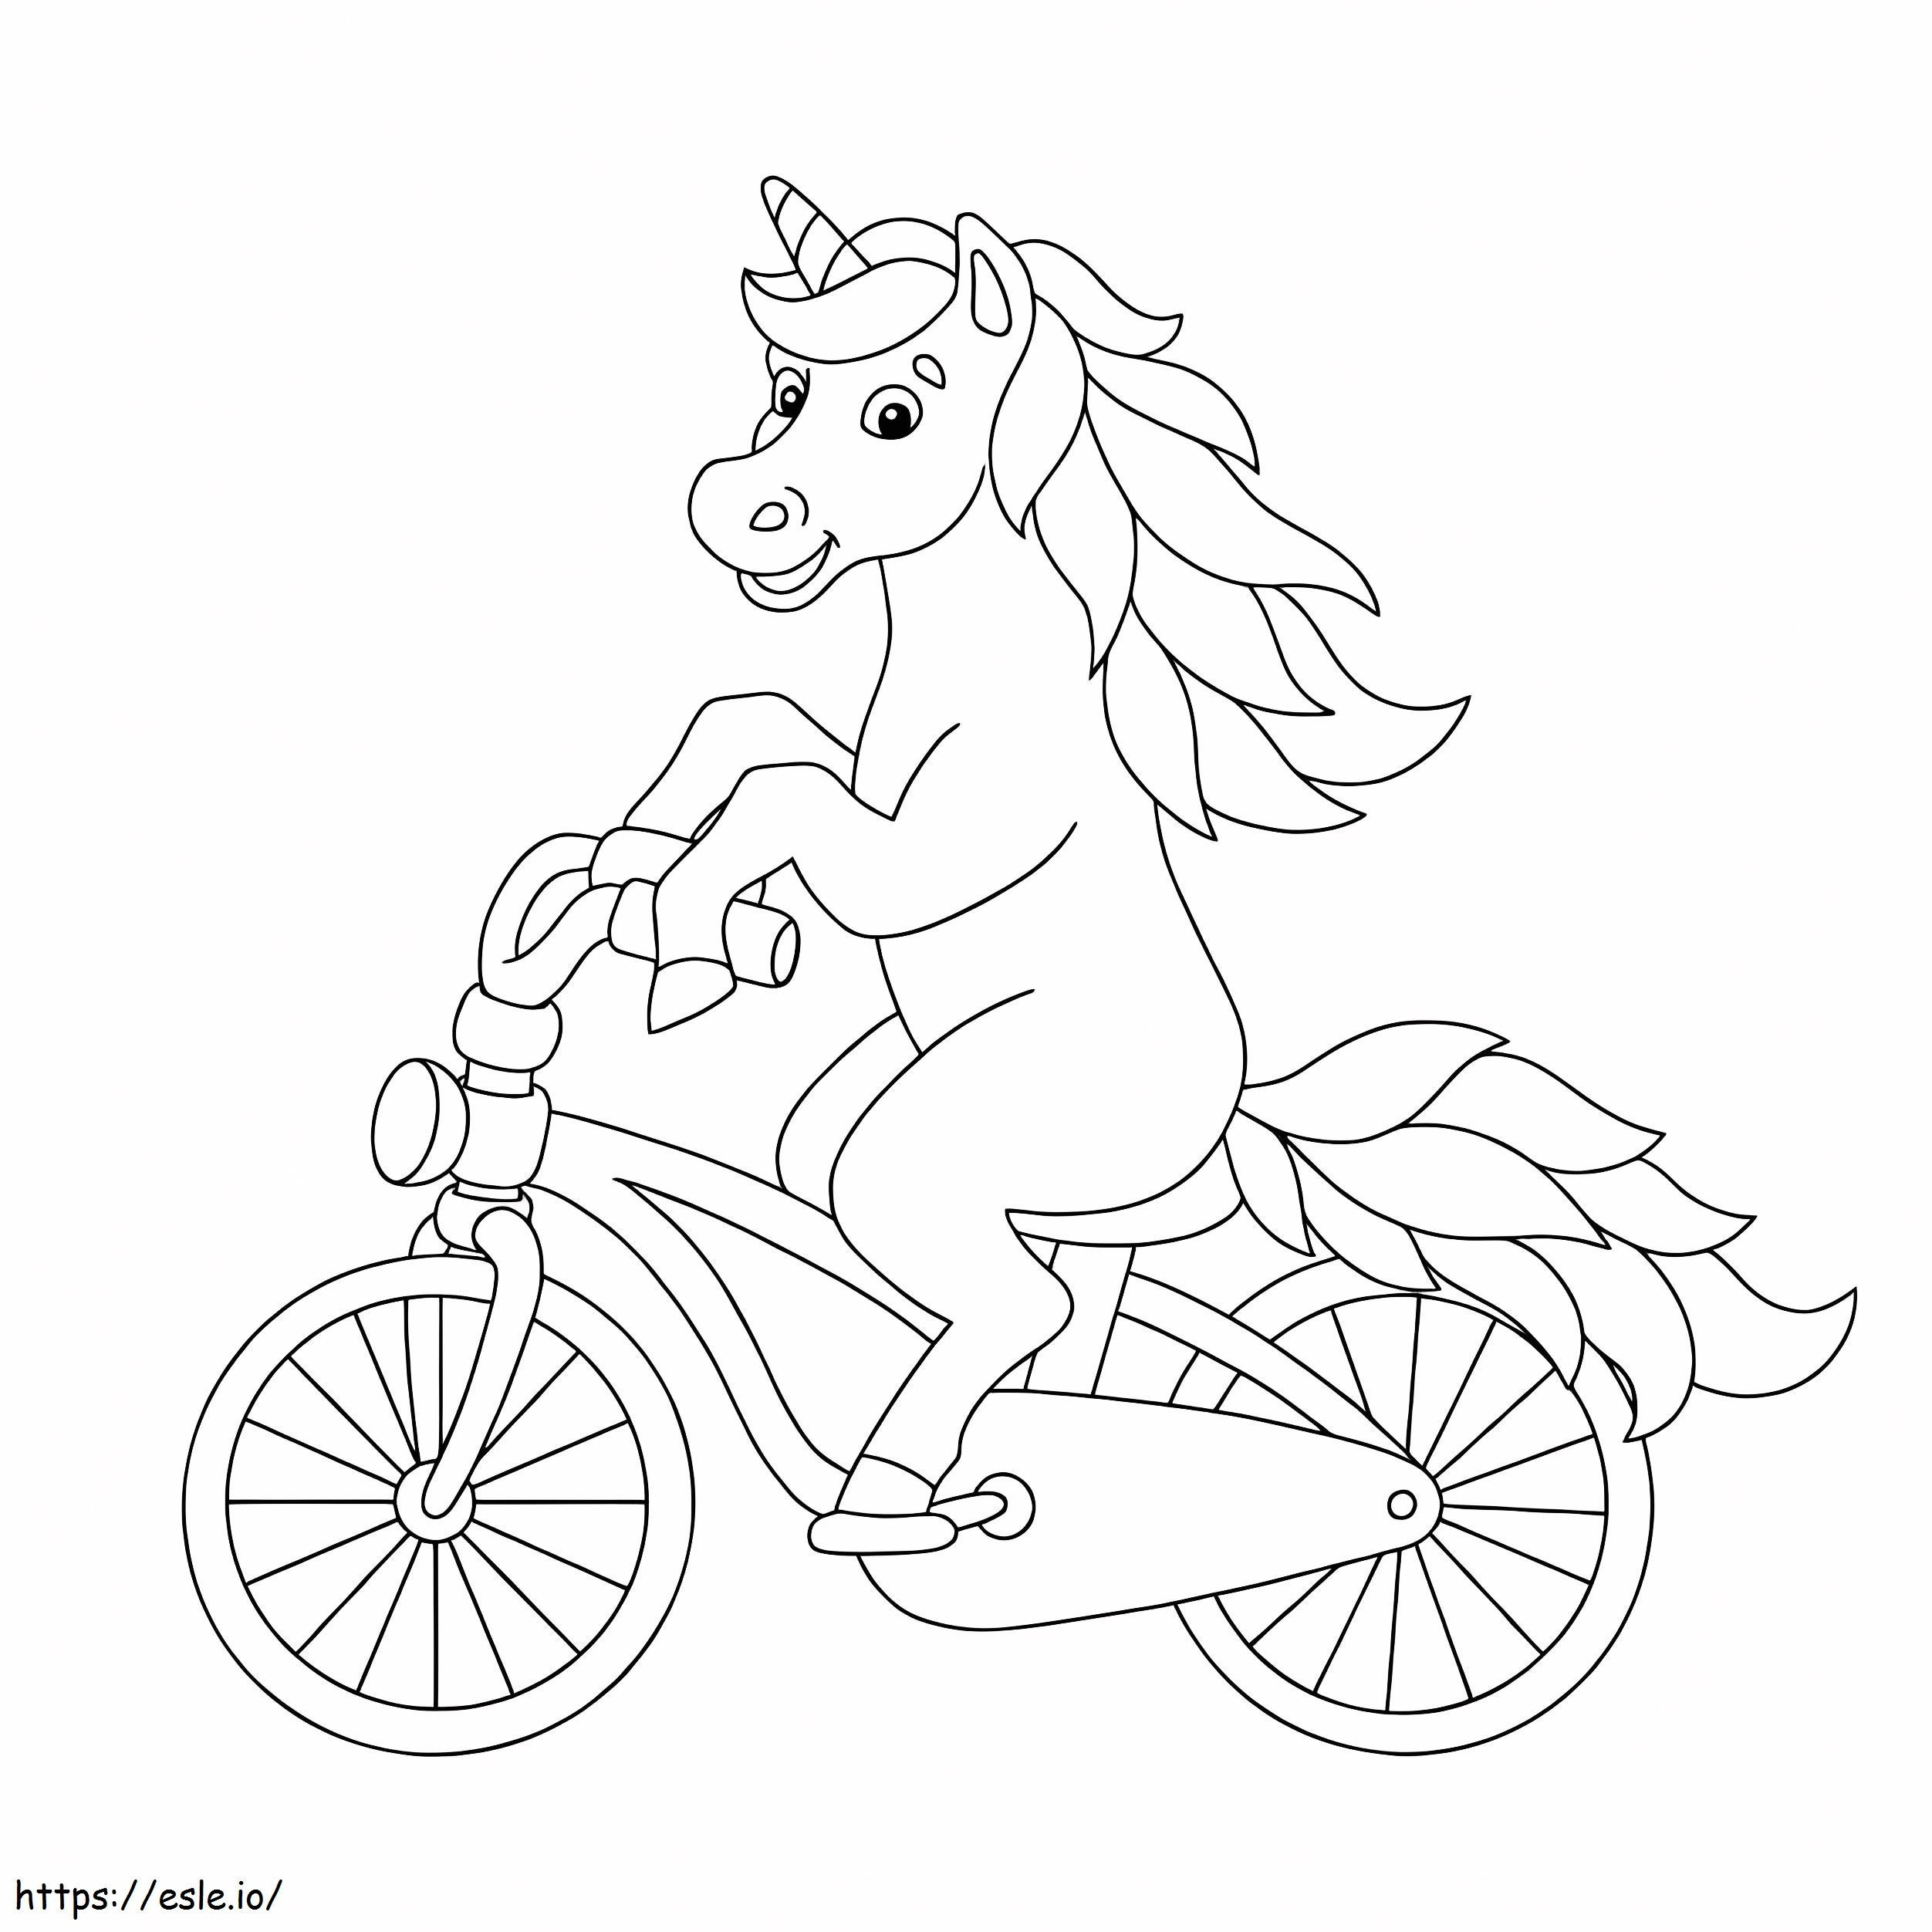 Unicorn On Bicycle coloring page